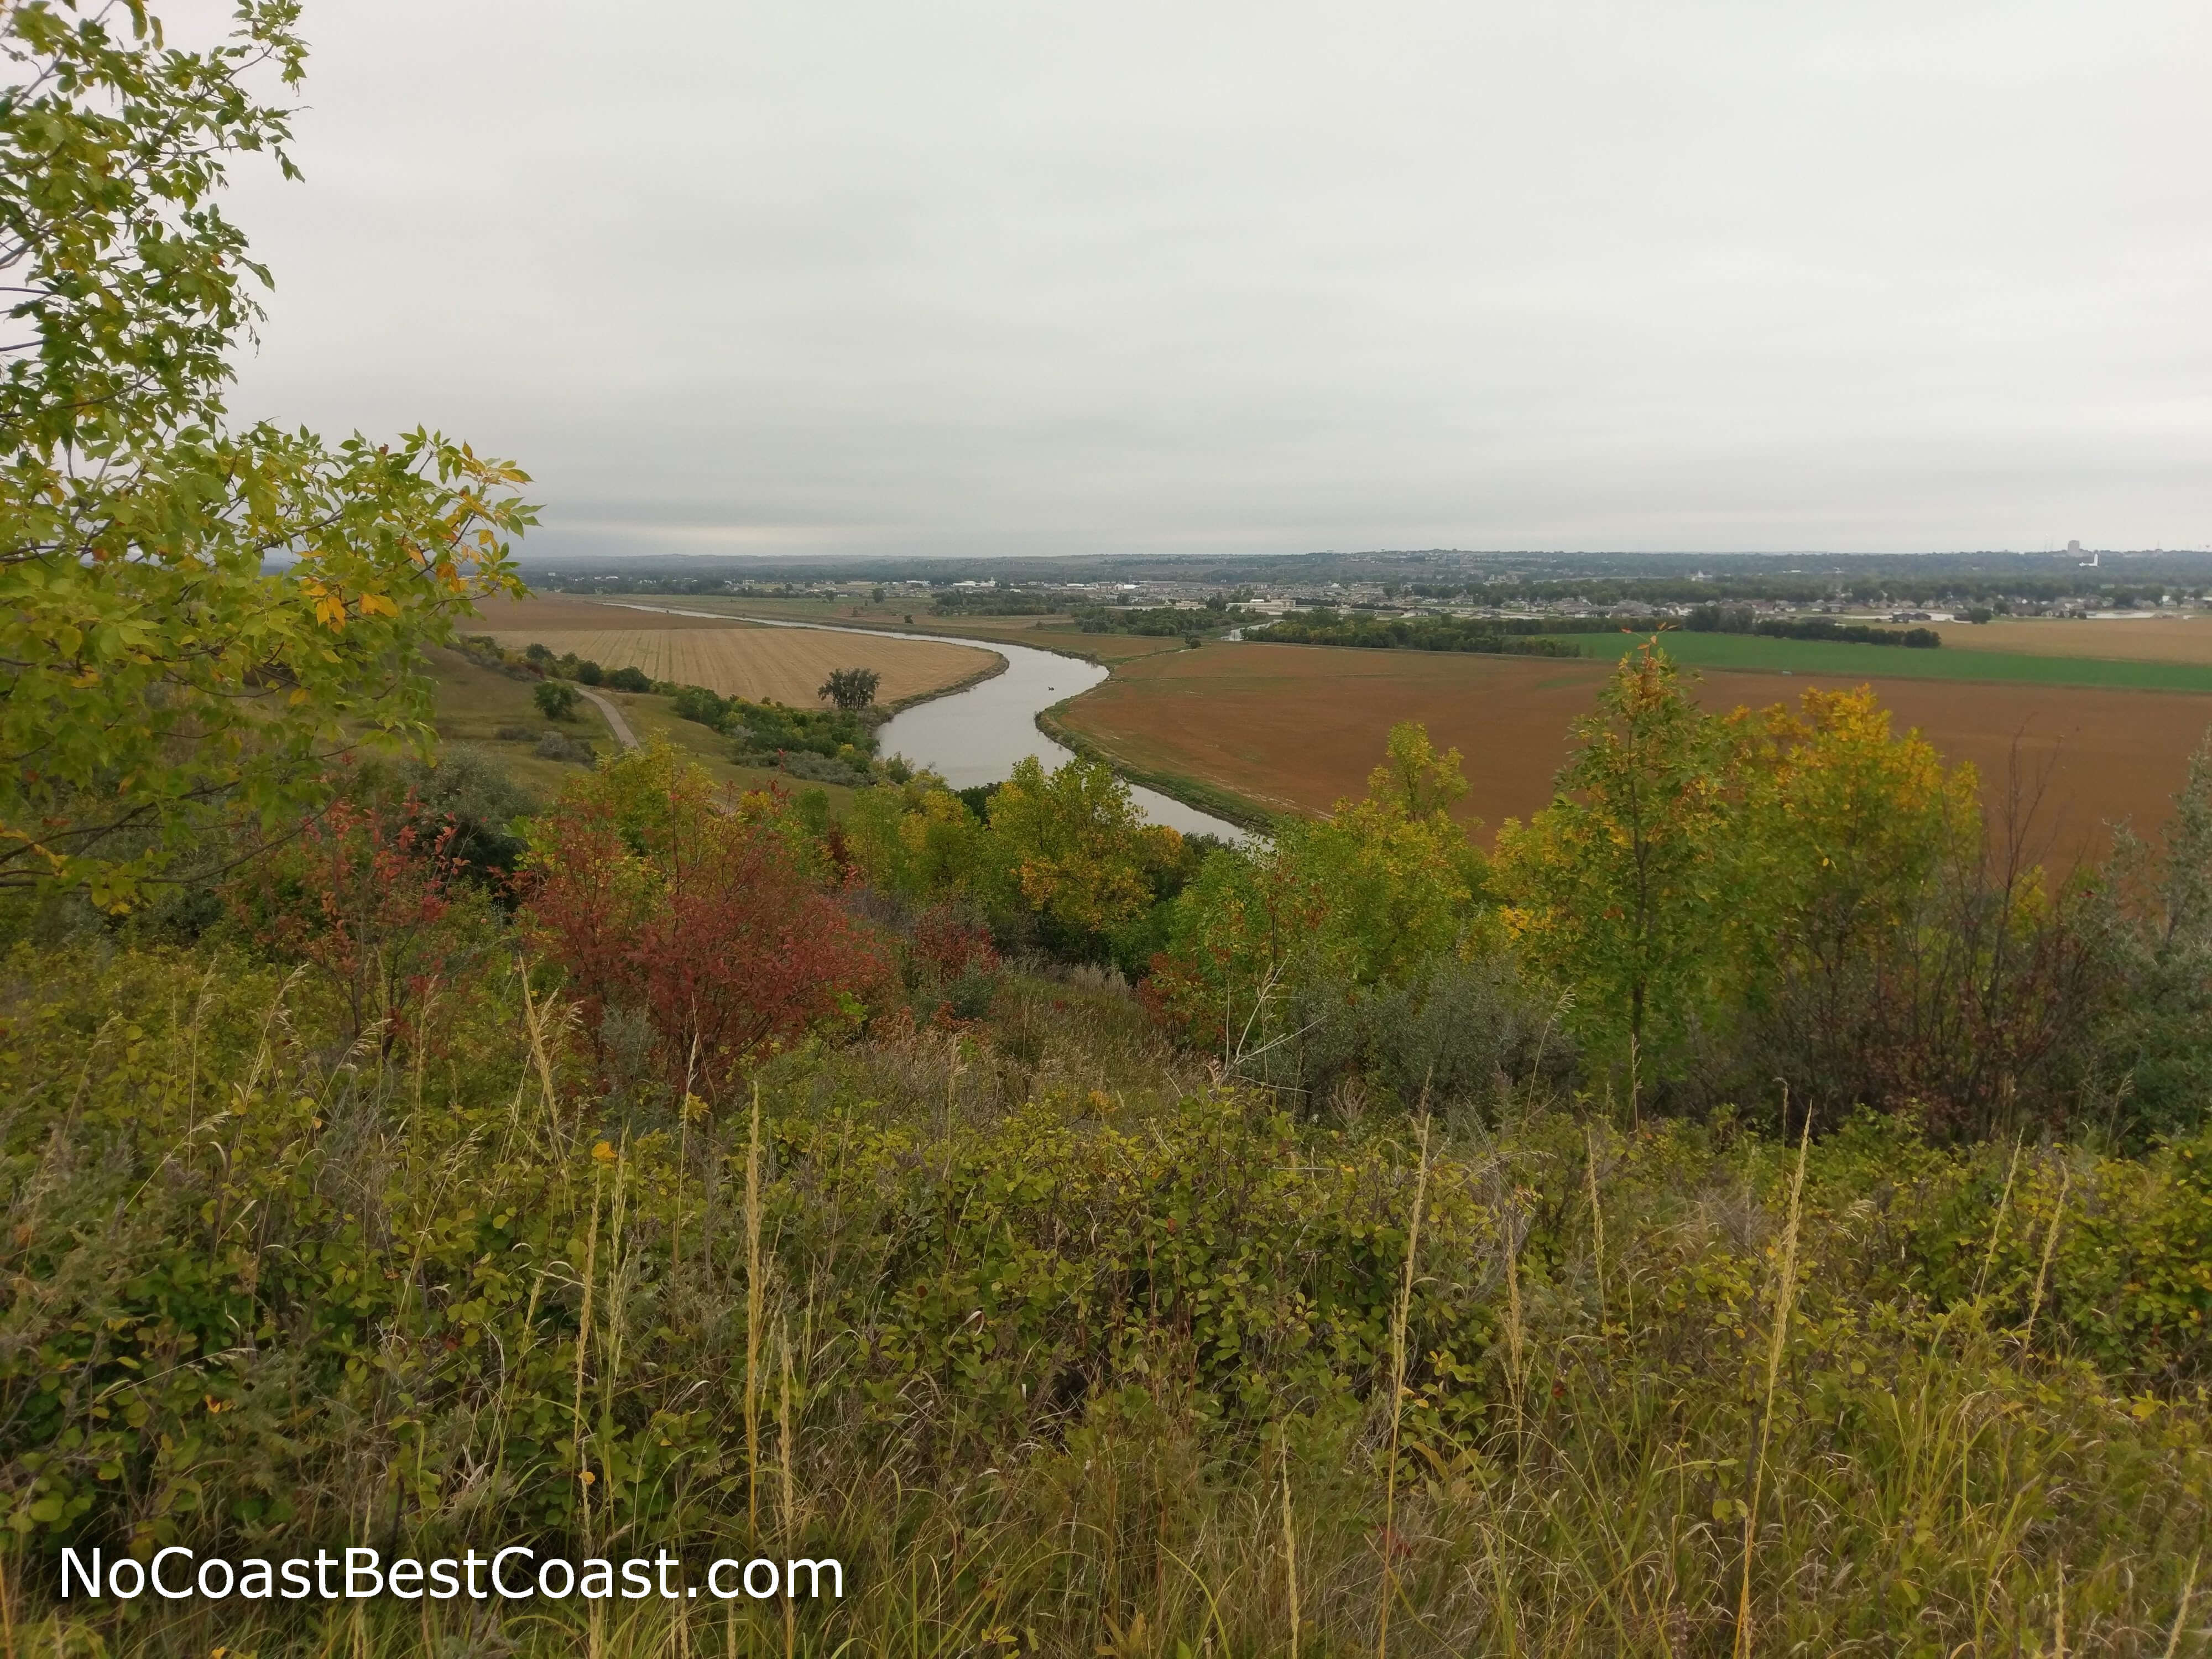 The Heart River and Bismarck from the top of the bluff